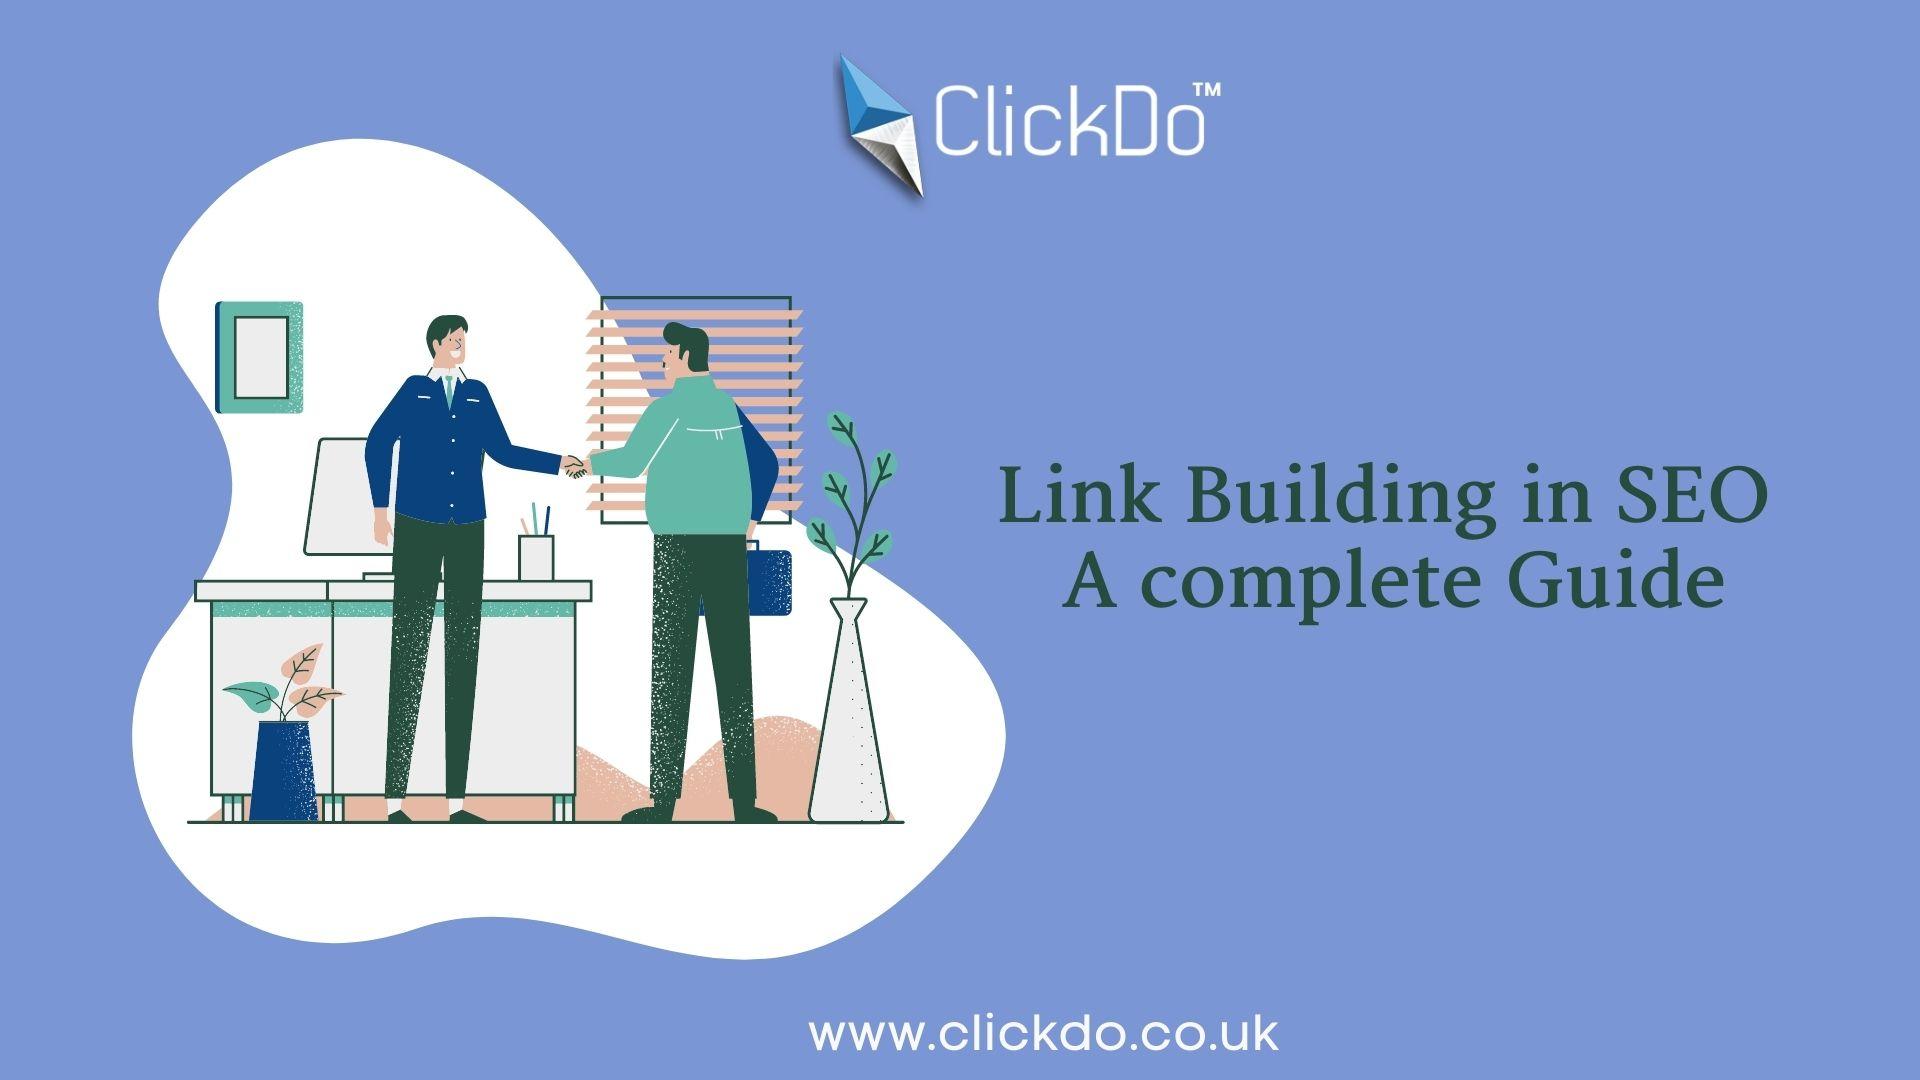 Link Building in SEO A complete Guide